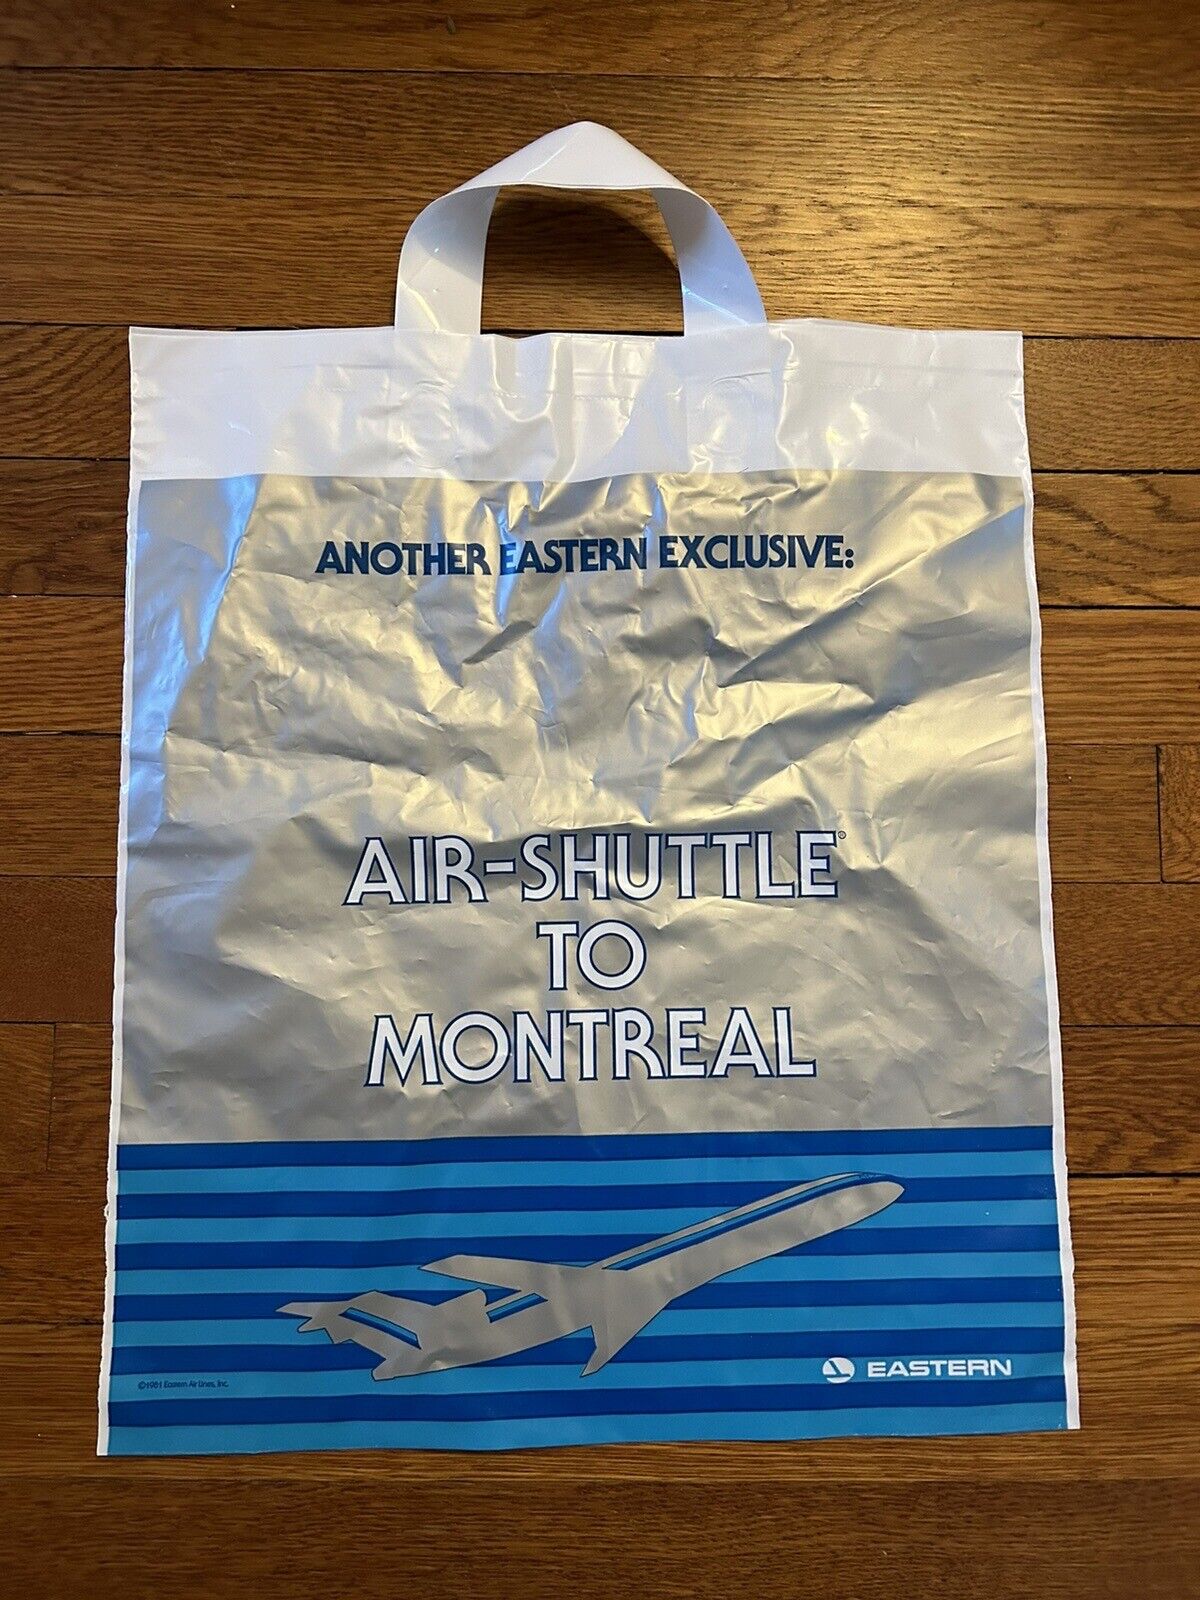 Eastern Airlines Plastic Bags - English/French, New York/Montreal Air-Shuttle